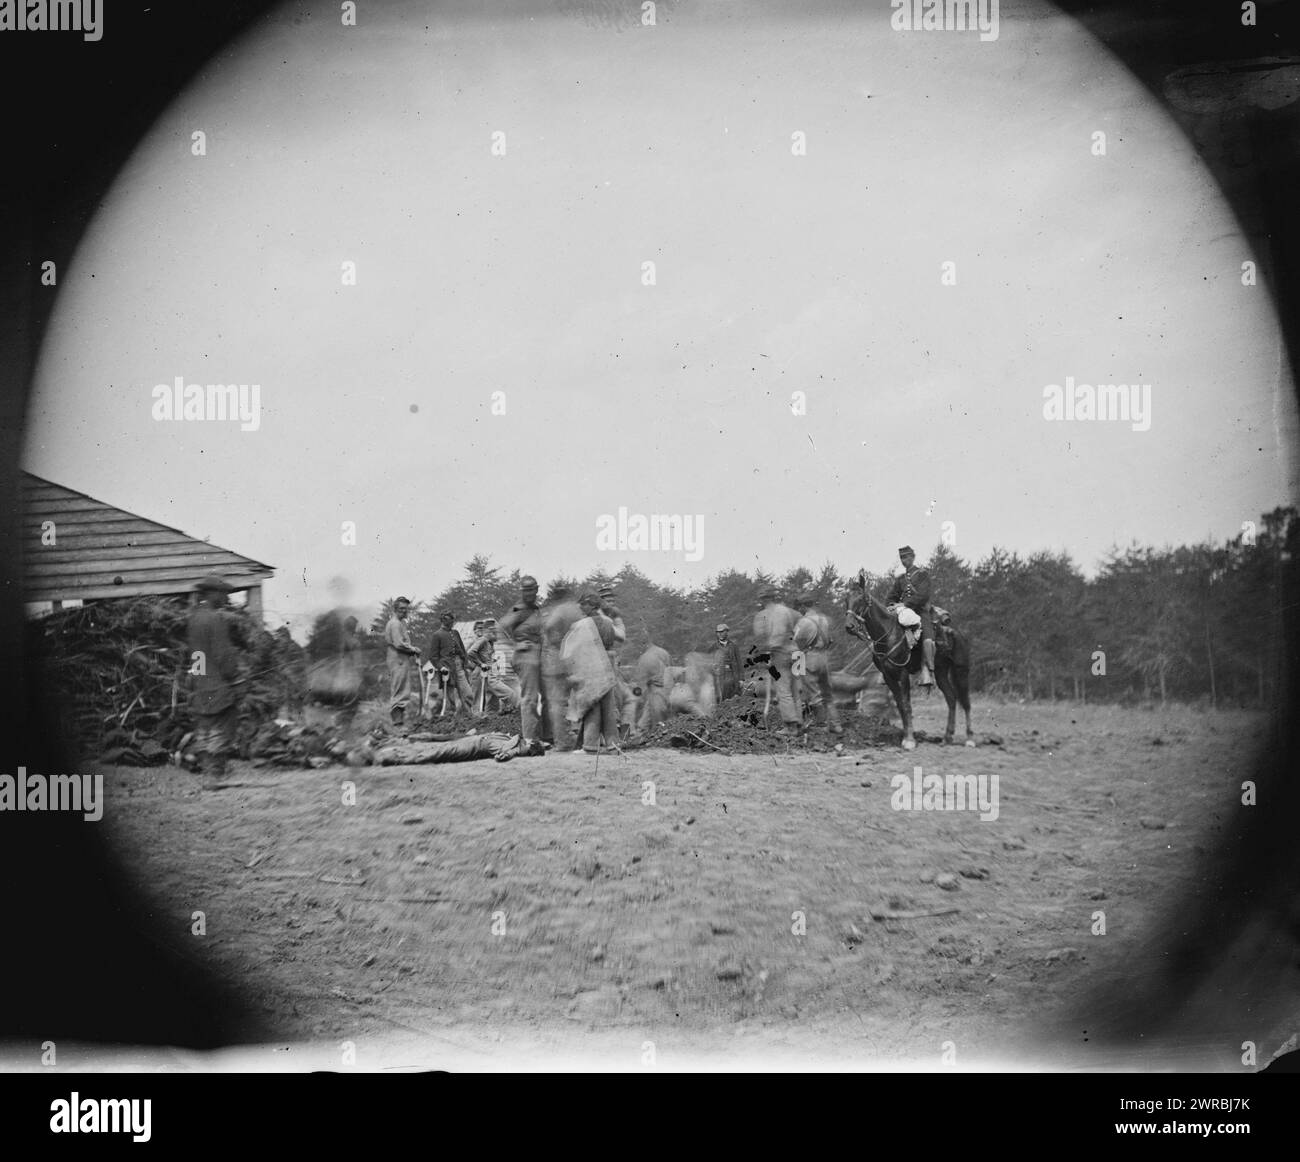 Spotsylvania Court House, Virginia (vicinity). 1st Mass. Heavy Artillery burying the dead at Mrs. Alsop's house after the battle of May 19th, O'Sullivan, Timothy H., 1840-1882, photographer, 1864 May 20, United States, History, Civil War, 1861-1865, Glass negatives, 1860-1870, Stereographs, 1860-1870, 1 negative: glass, stereograph, wet collodion, 4 x 10 in Stock Photo